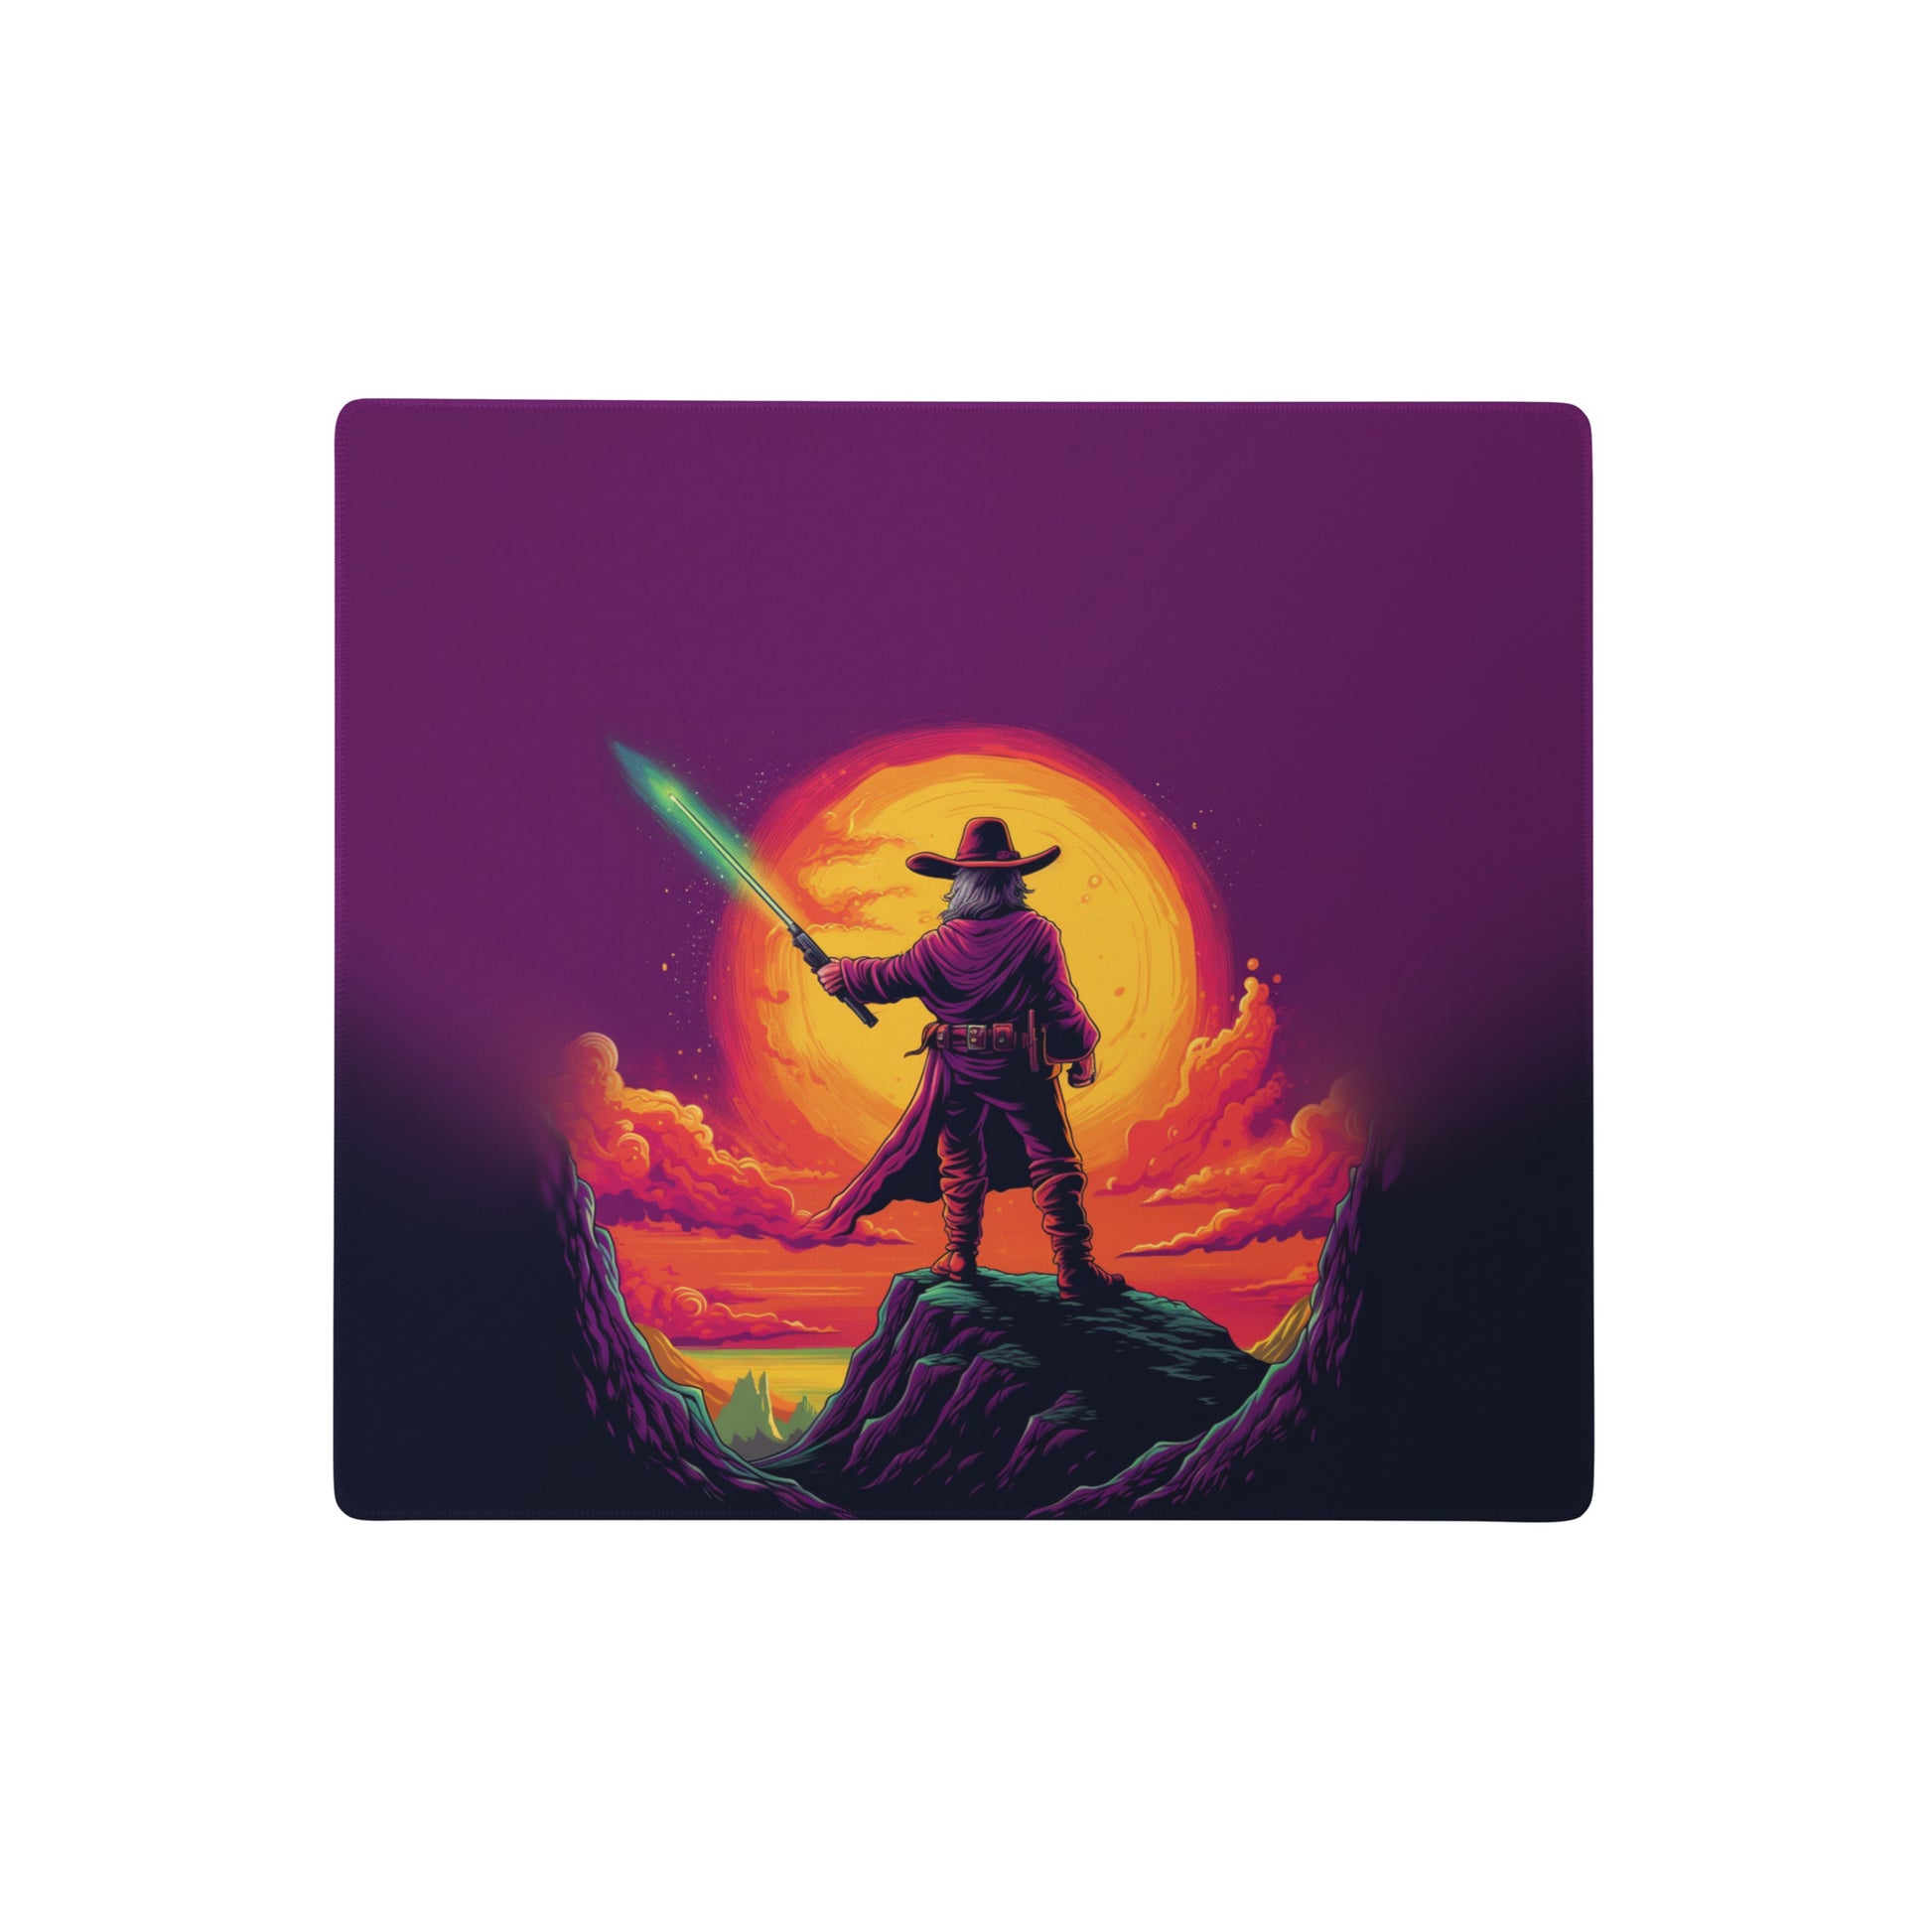 A 18" x 16" desk pad with a cowboy holding a glowing sword looking at the sunset.